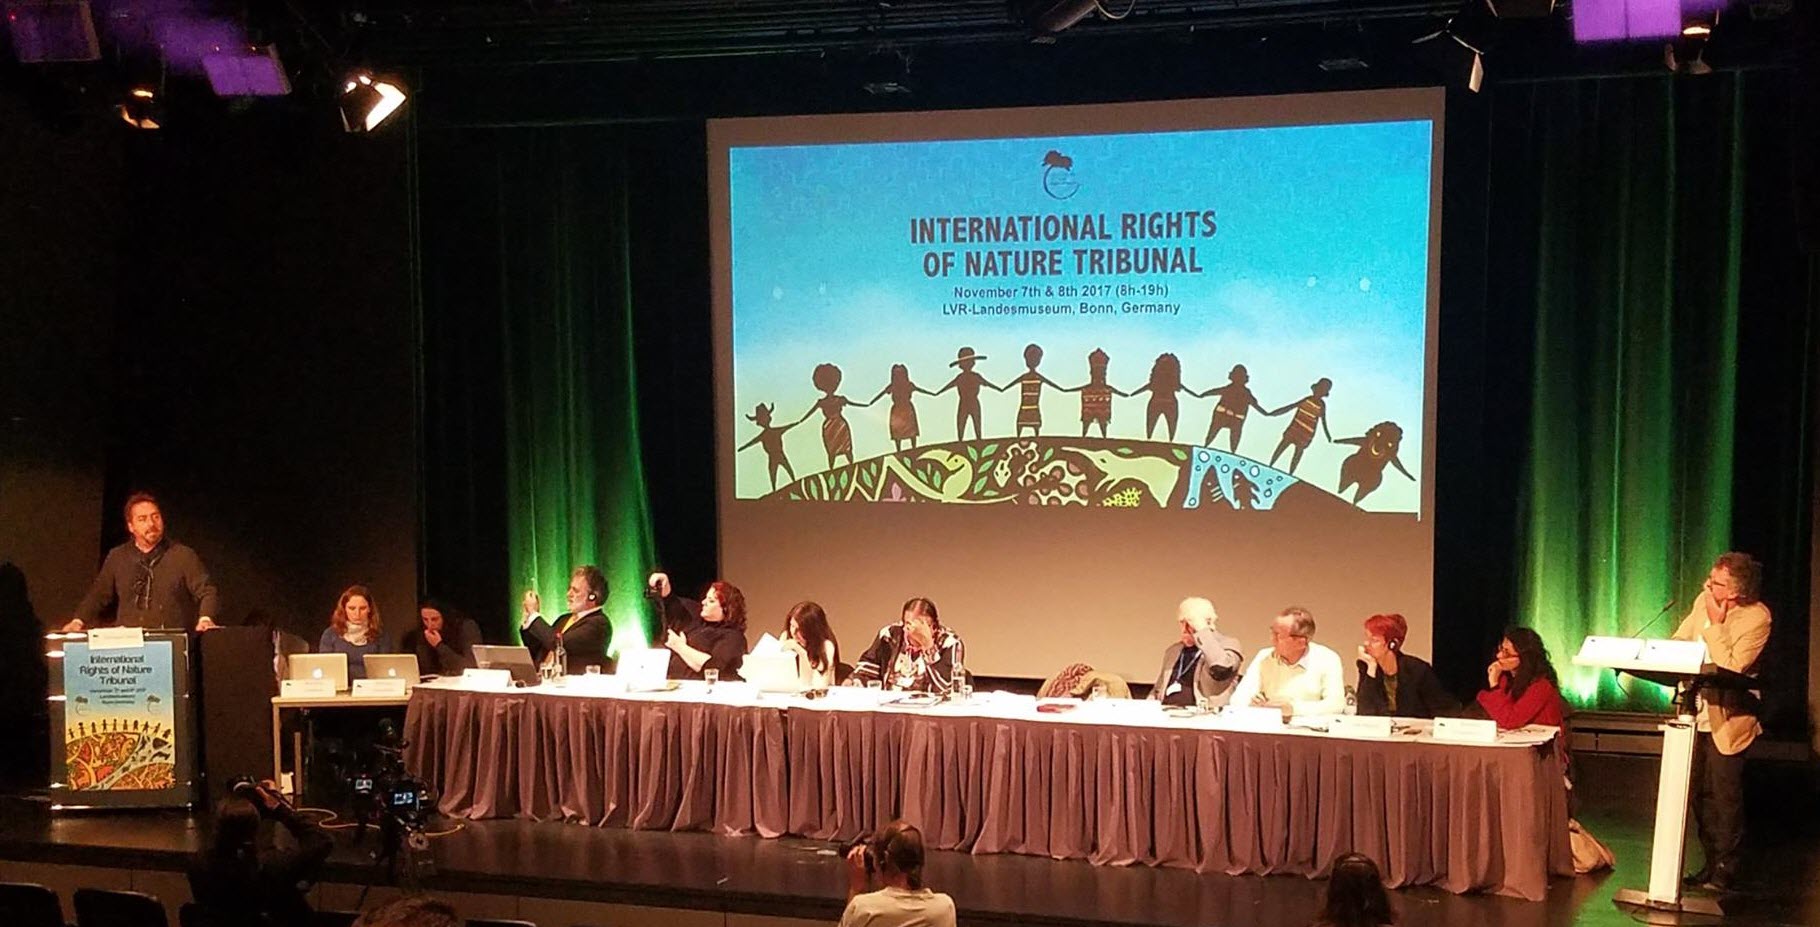 Case findings by the Rights of Nature Tribunal in Bonn